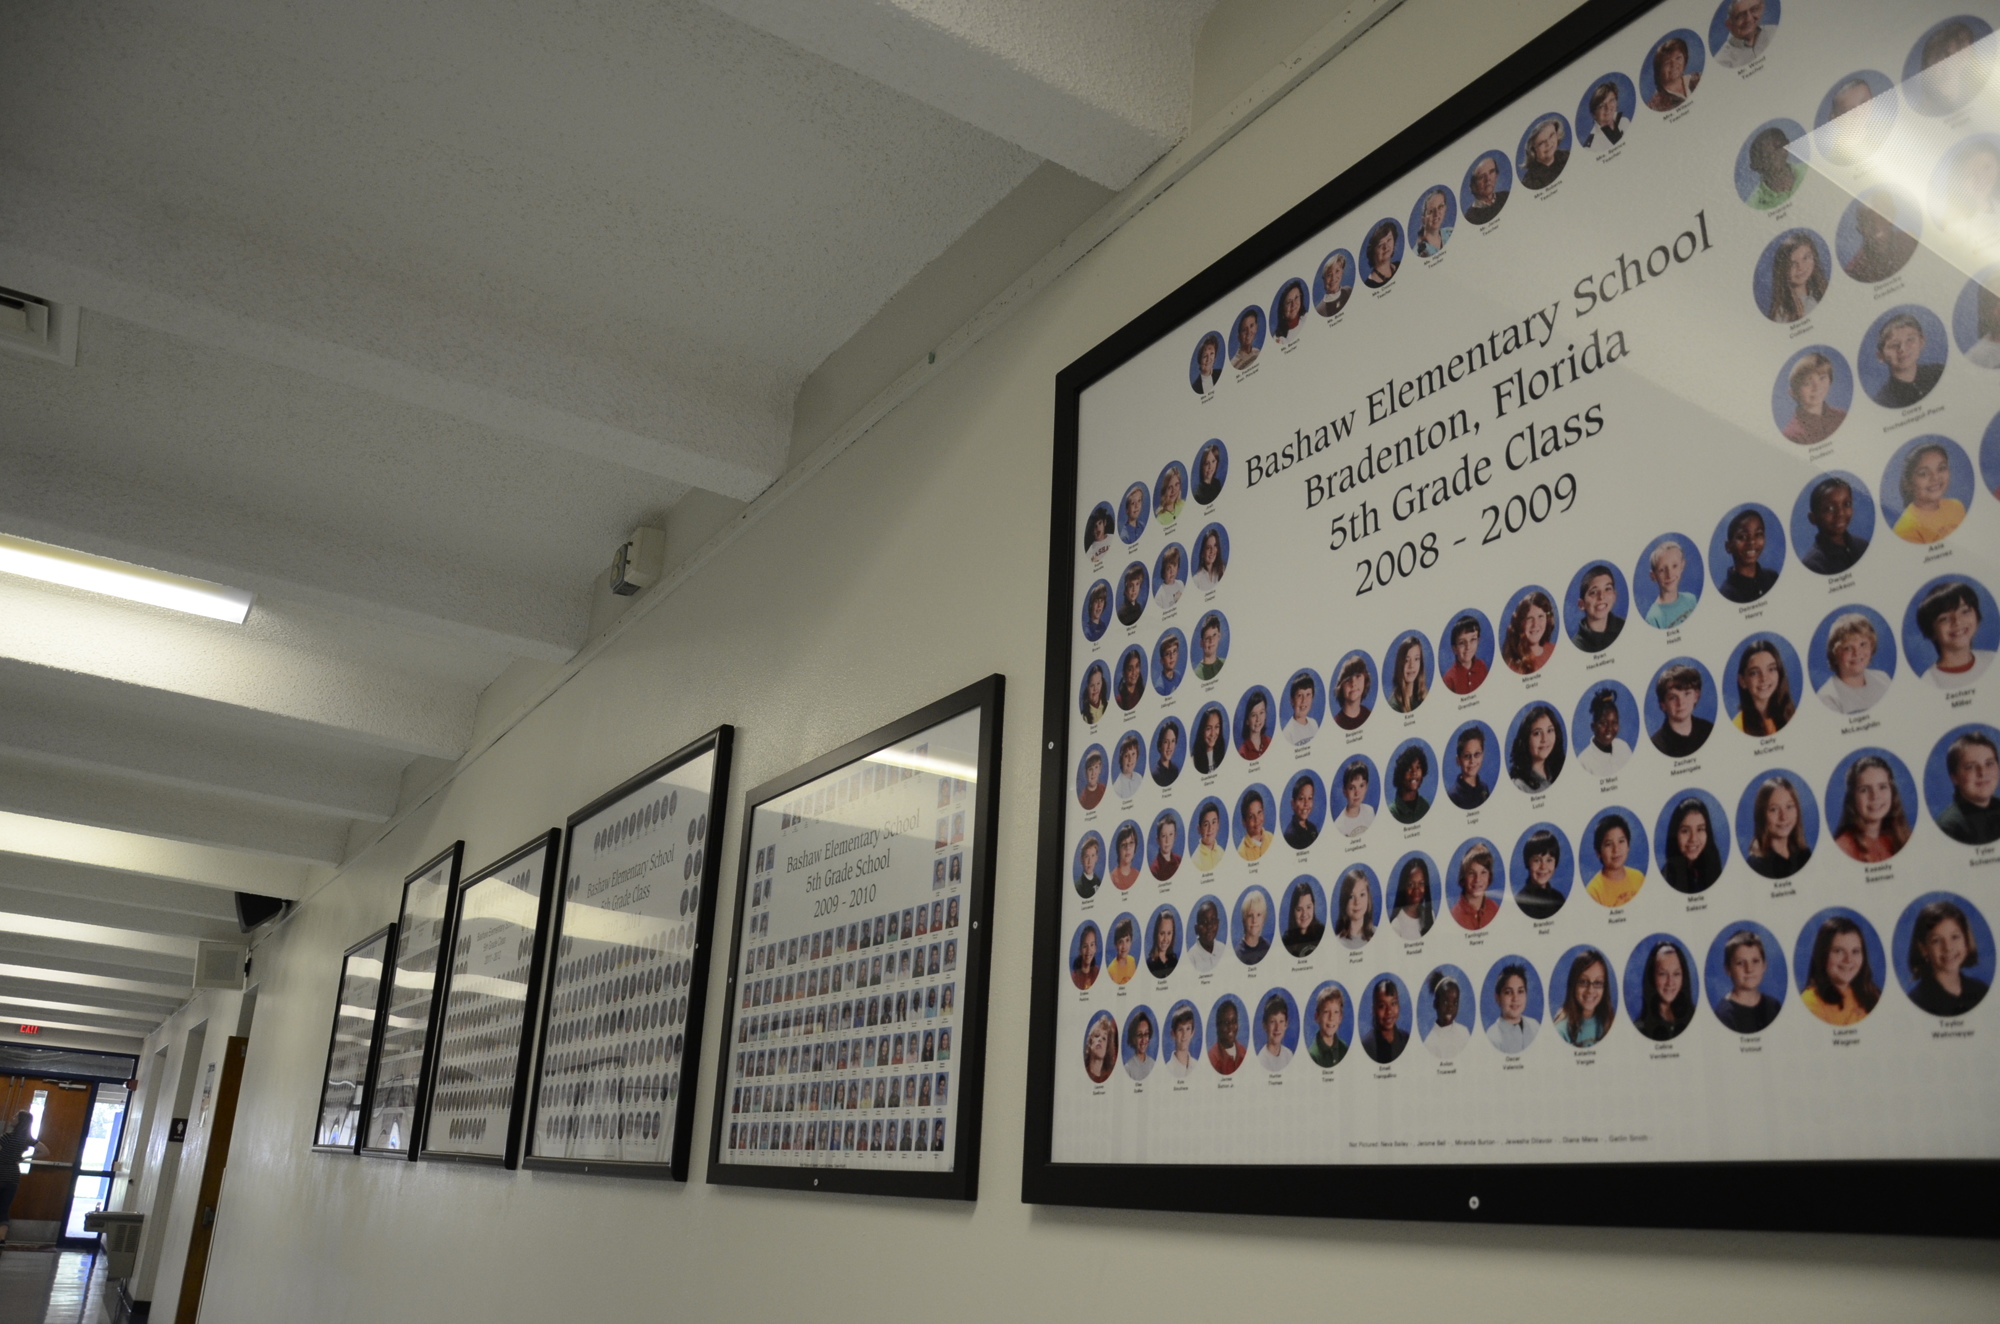 One of Bashaw's traditions is the 5th-grade hallway, which displays class composites for every graduating class.